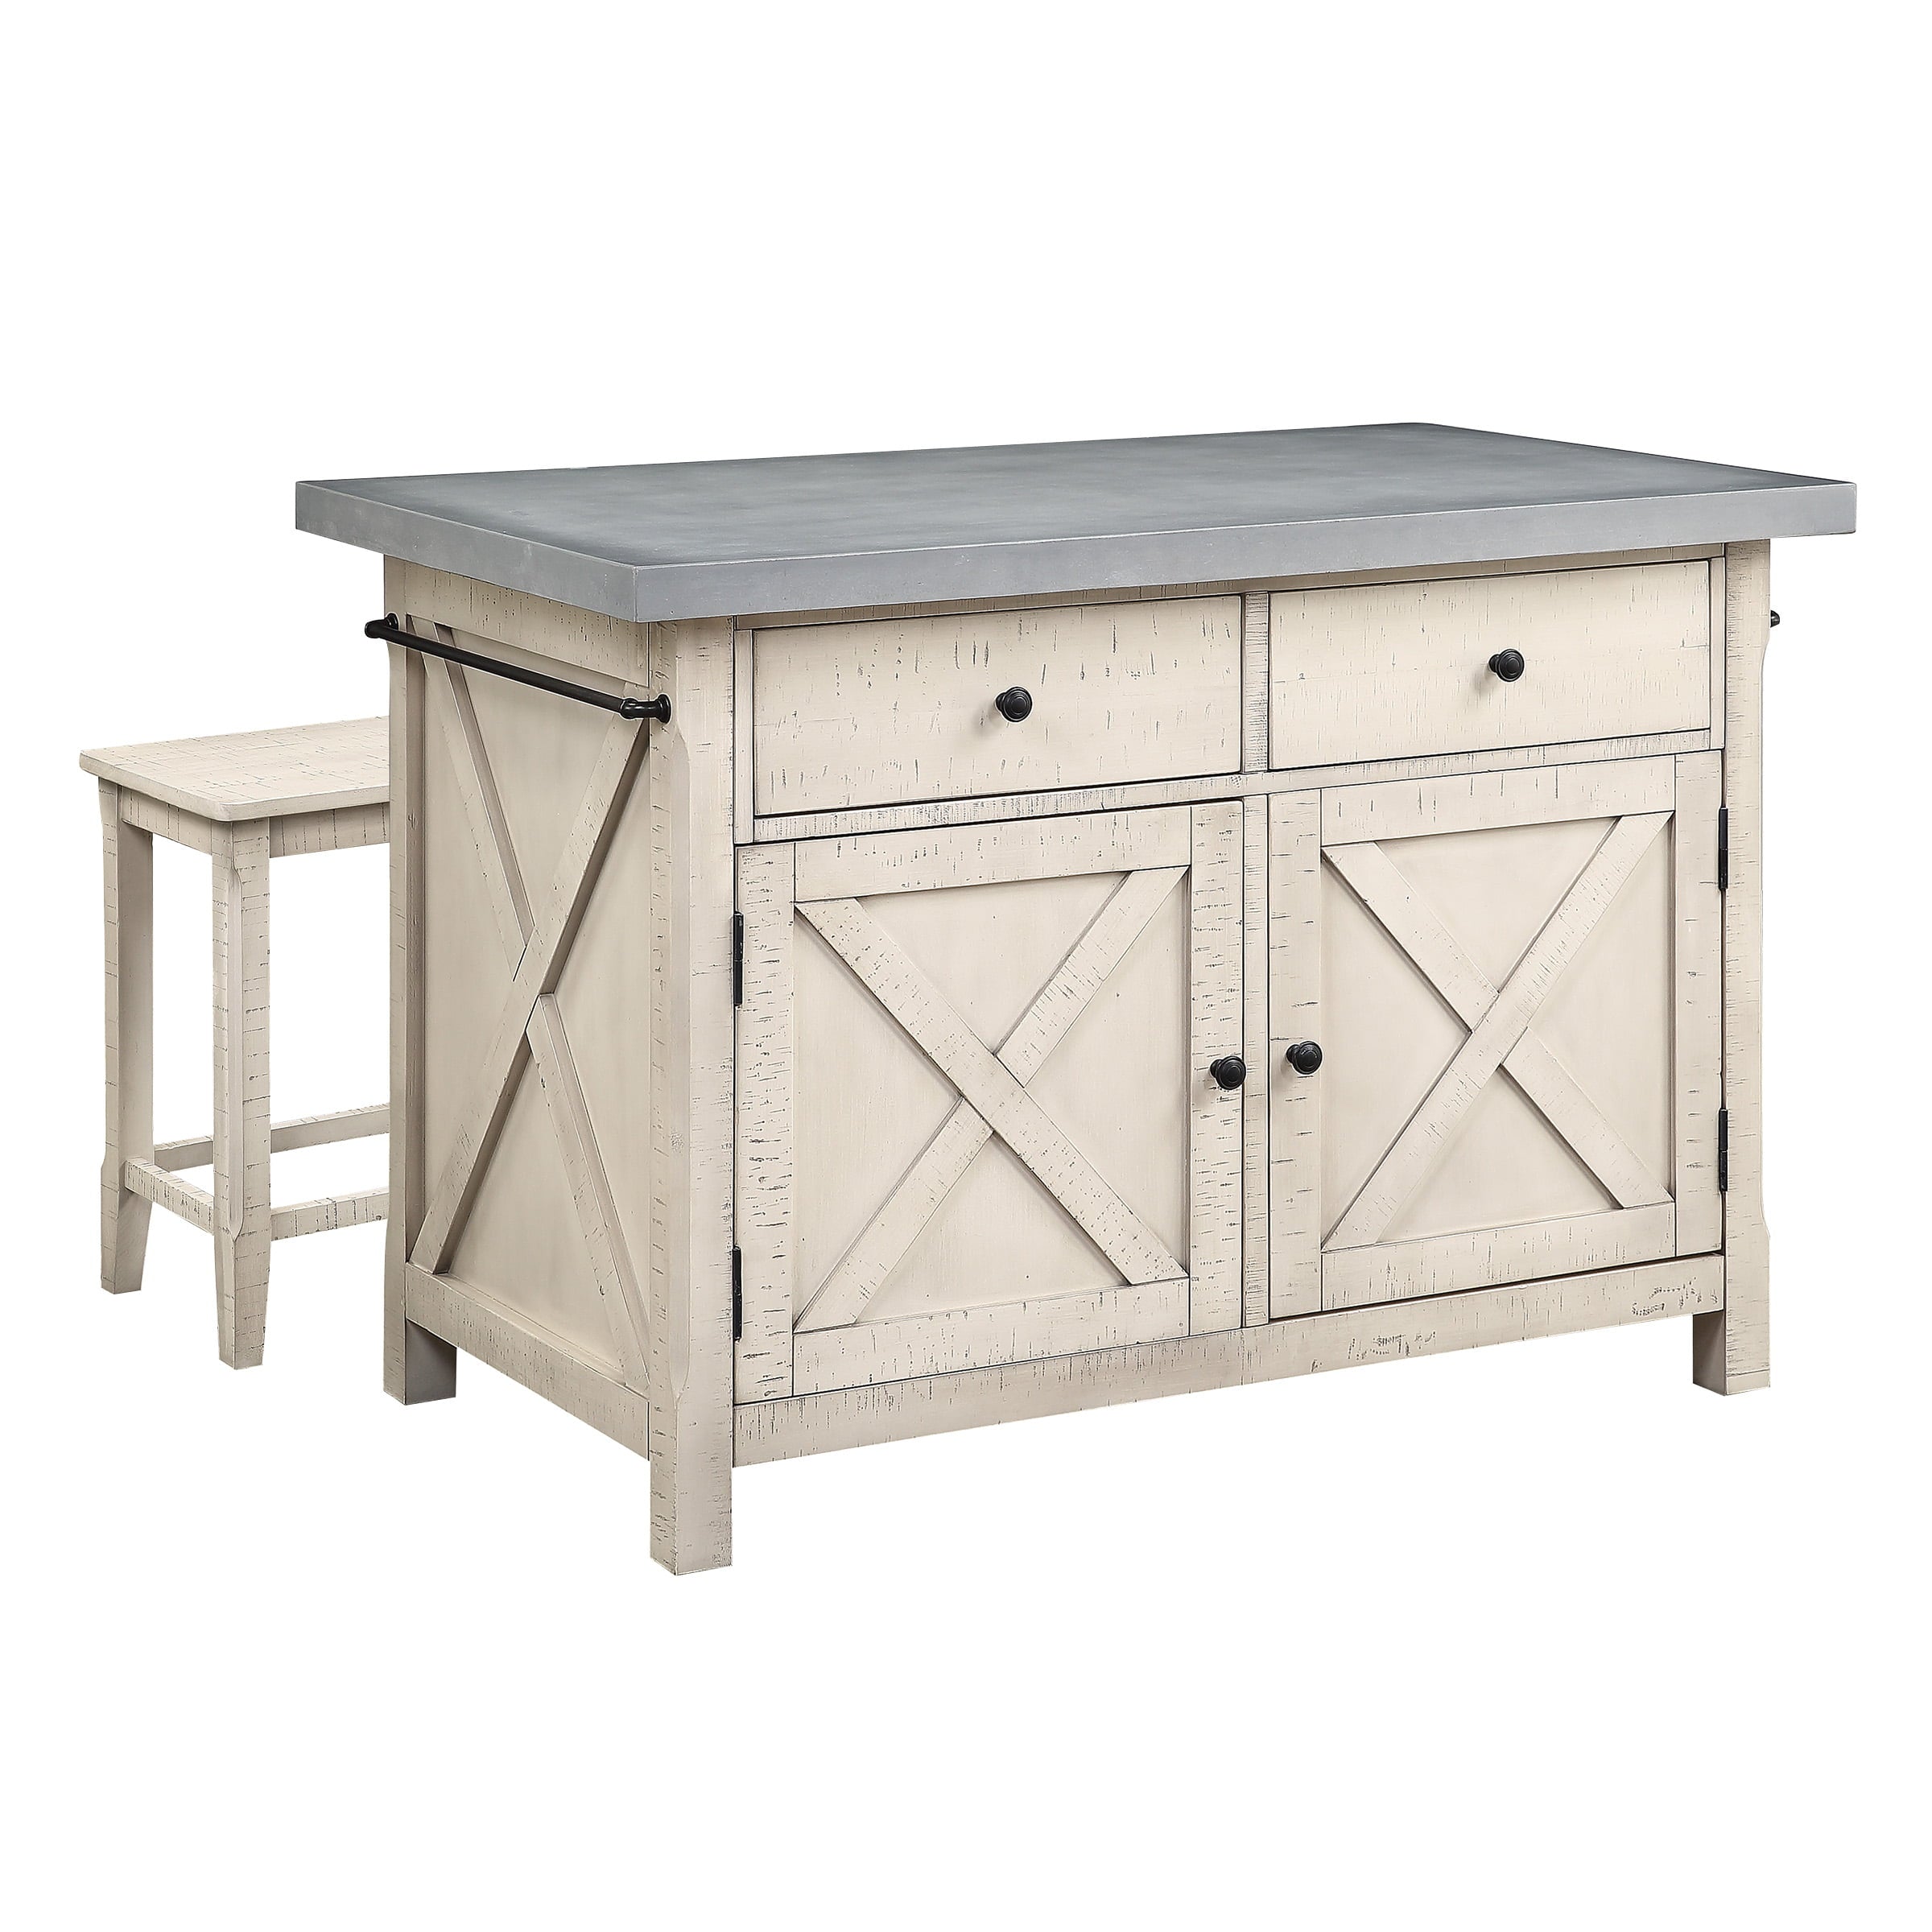 OSP Furniture Nashville Kitchen Island with Cement like Grey Top and 2 Stools